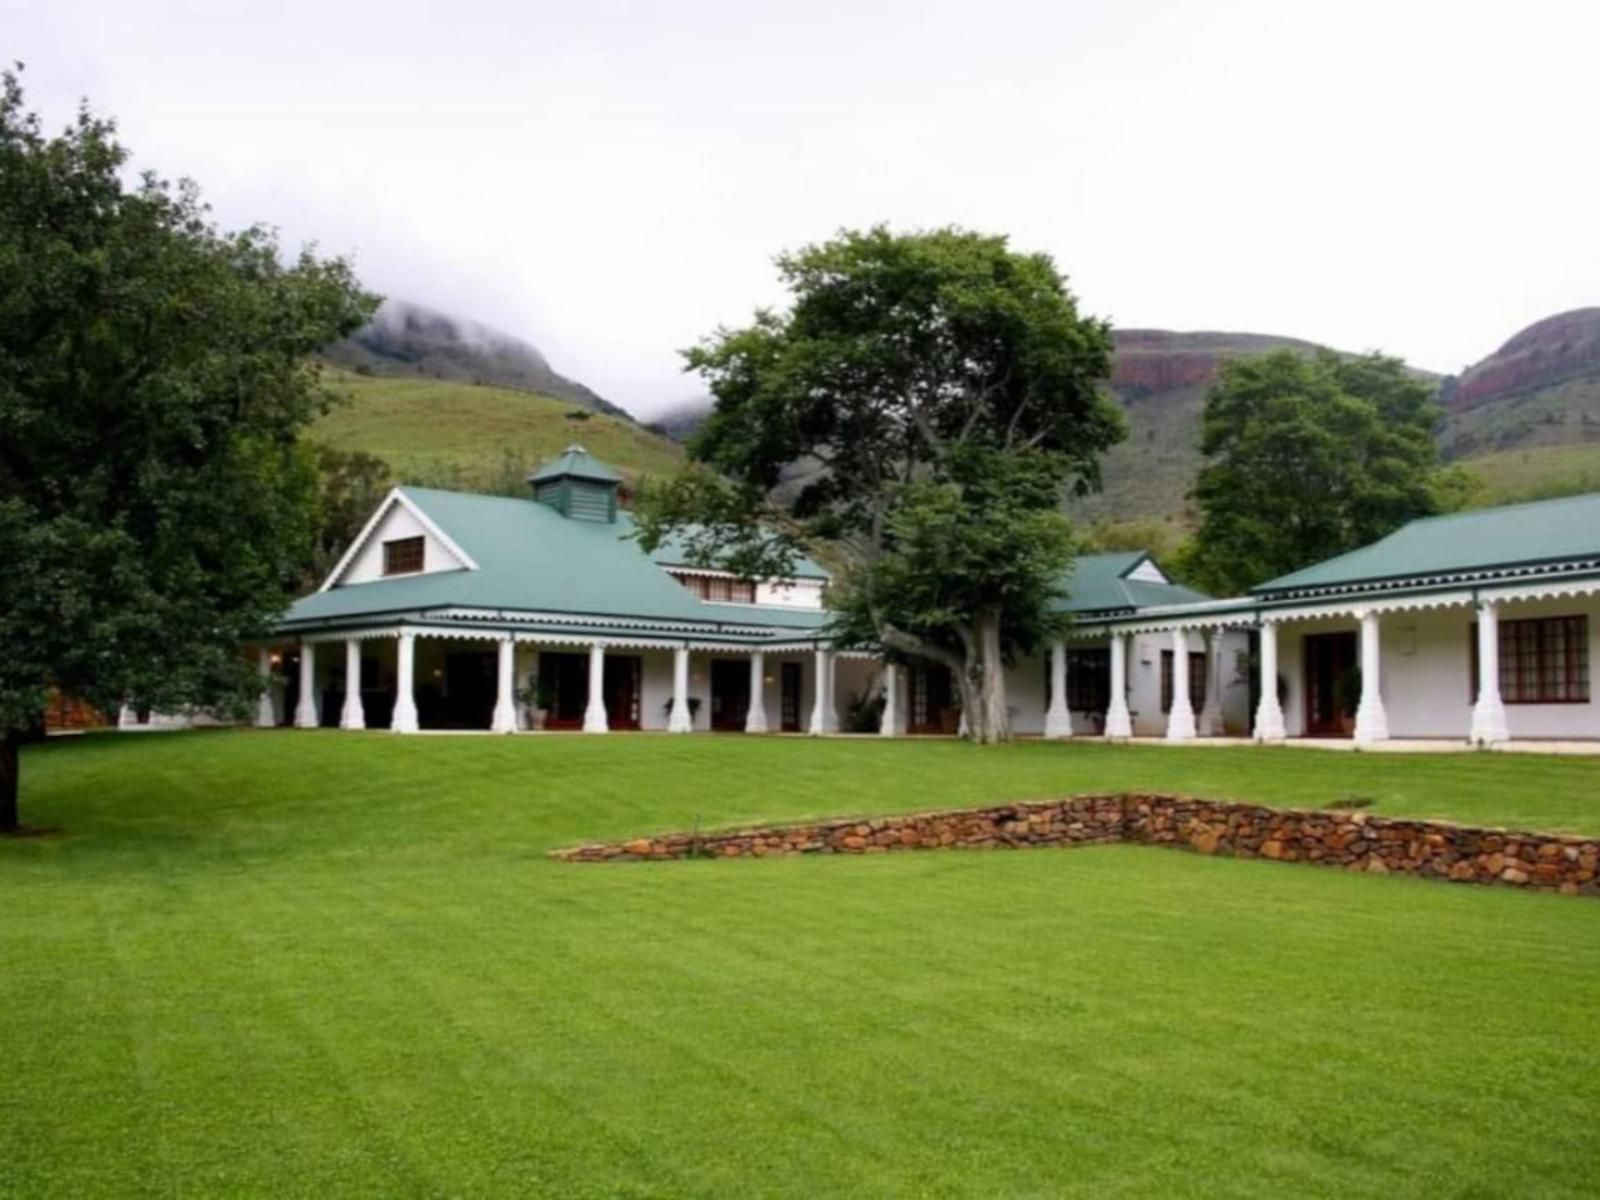 Nooitgedacht Trout Lodge Lydenburg Mpumalanga South Africa House, Building, Architecture, Mountain, Nature, Golfing, Ball Game, Sport, Highland